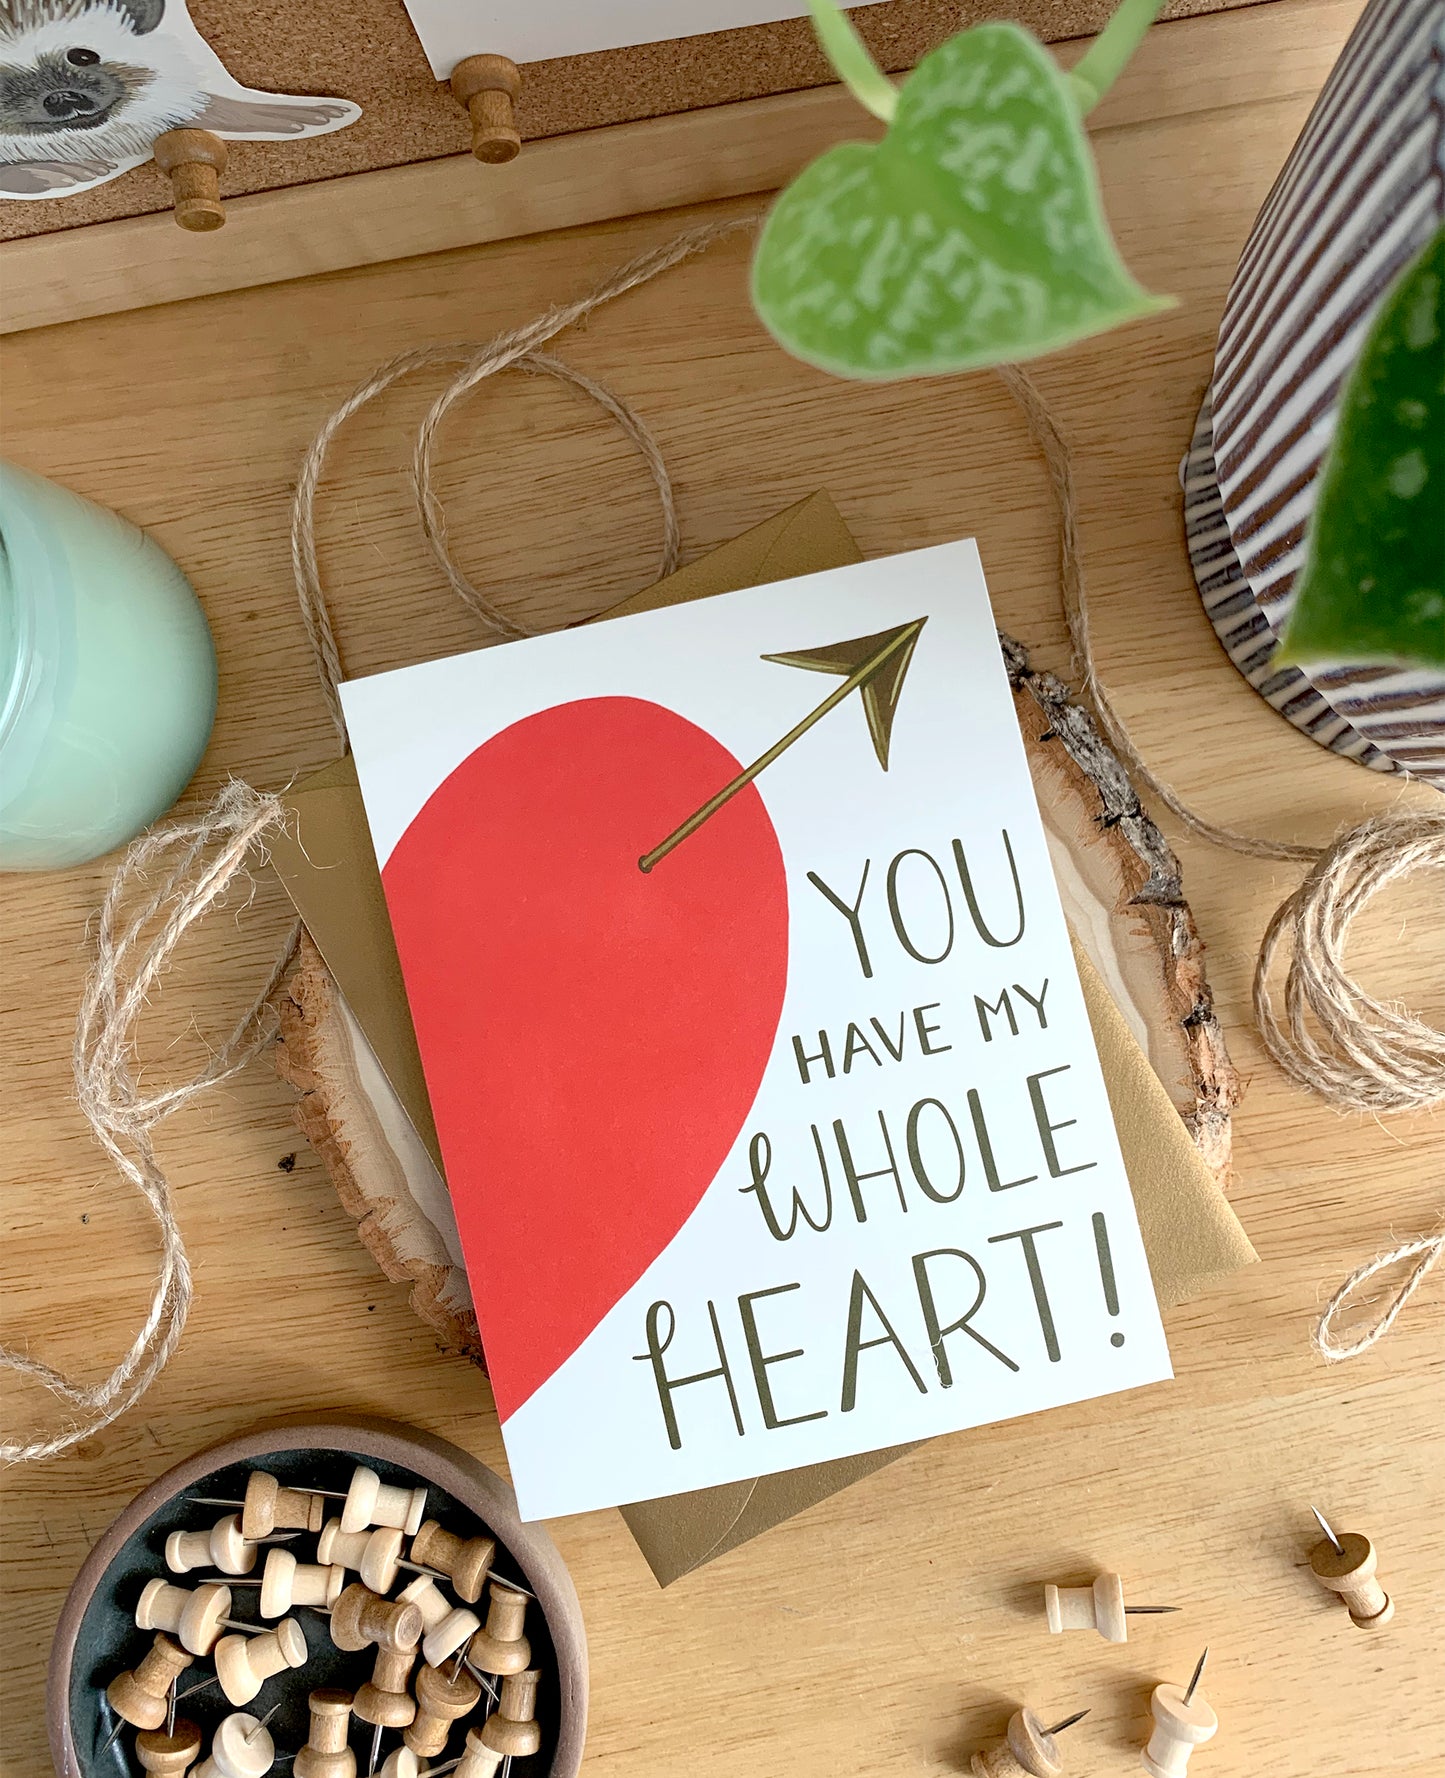 WHOLE HEART AND CUPID'S ARROW - VALENTINE'S DAY GREETING CARD